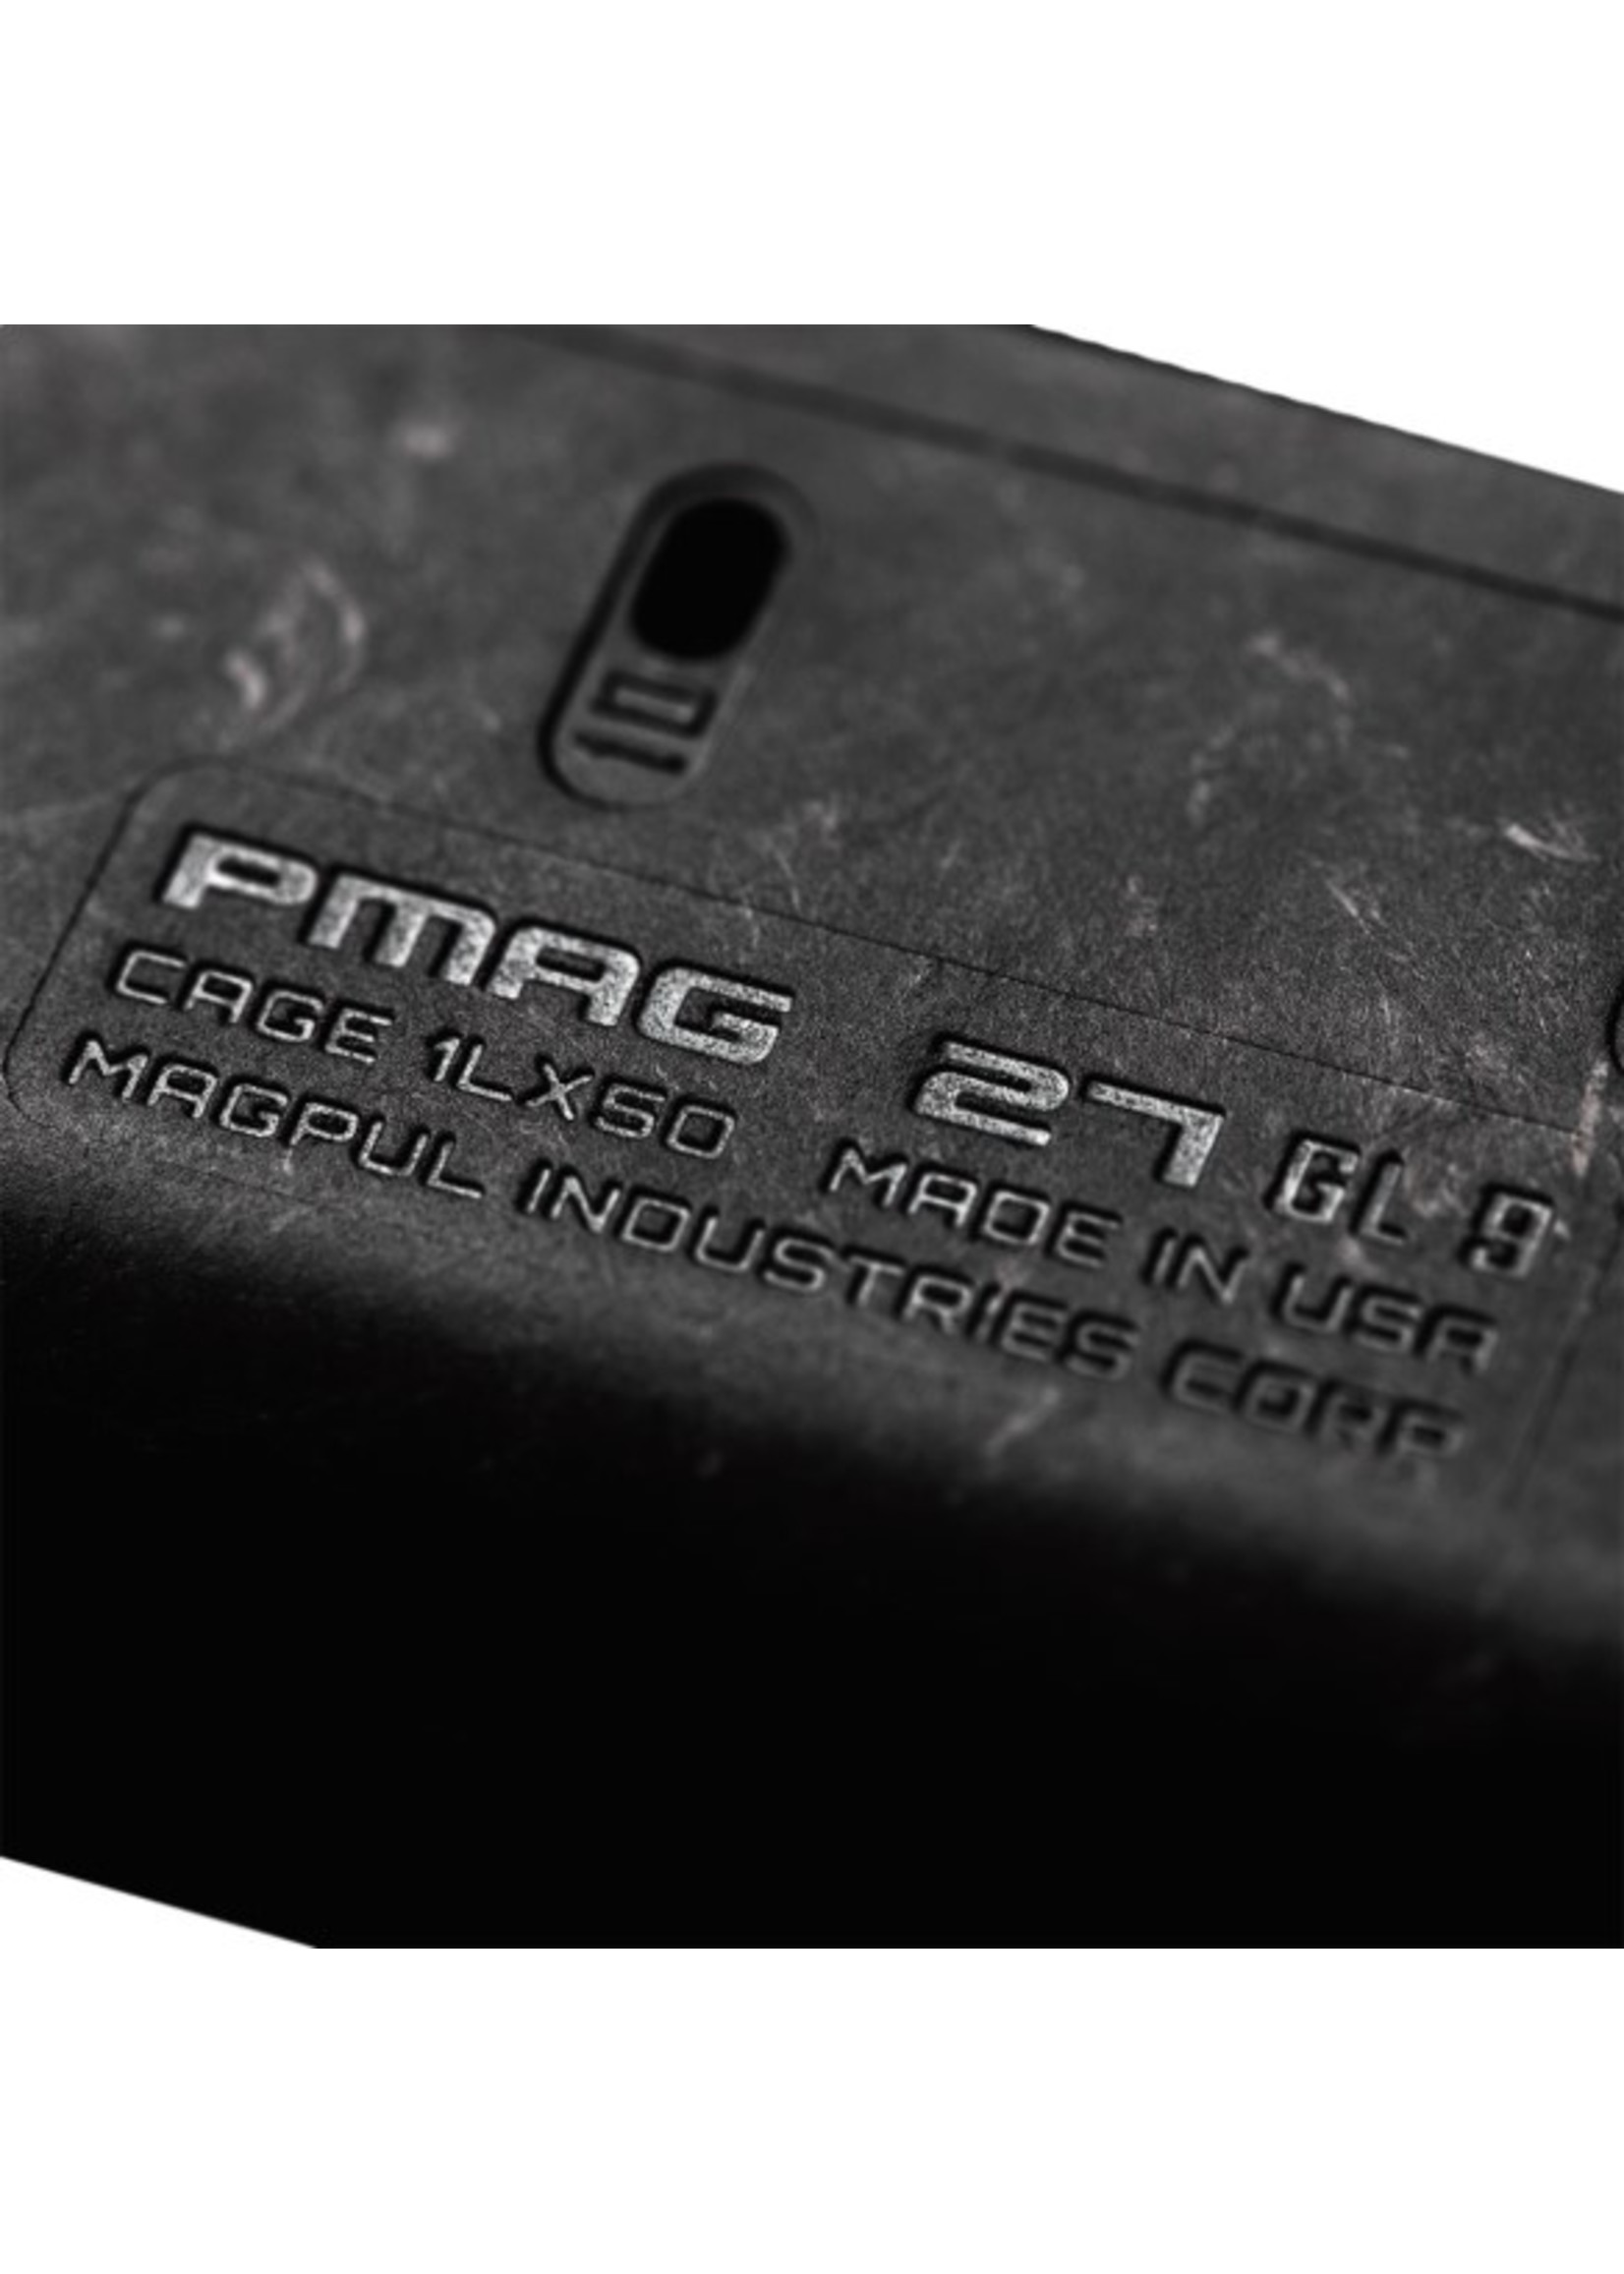 MAGPUL PMAG 27 GL9 – GLOCK (PINNED TO 10)